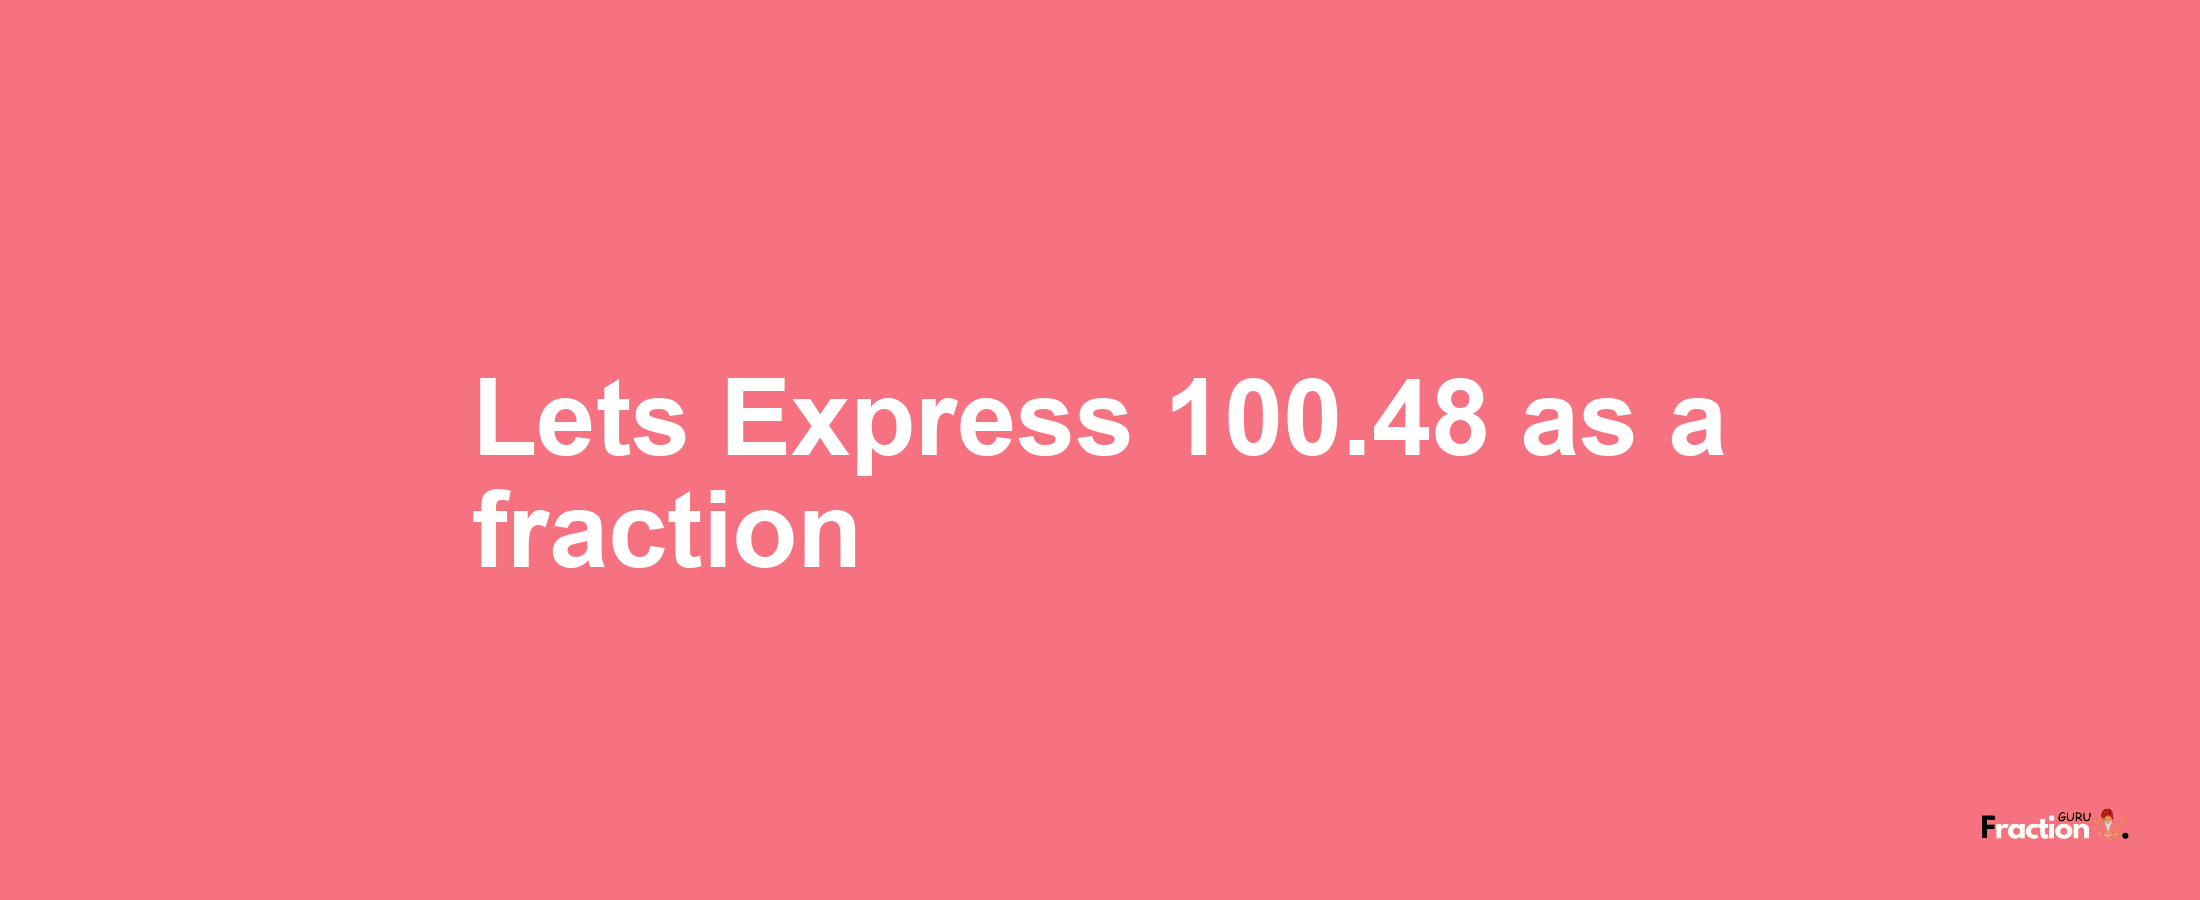 Lets Express 100.48 as afraction